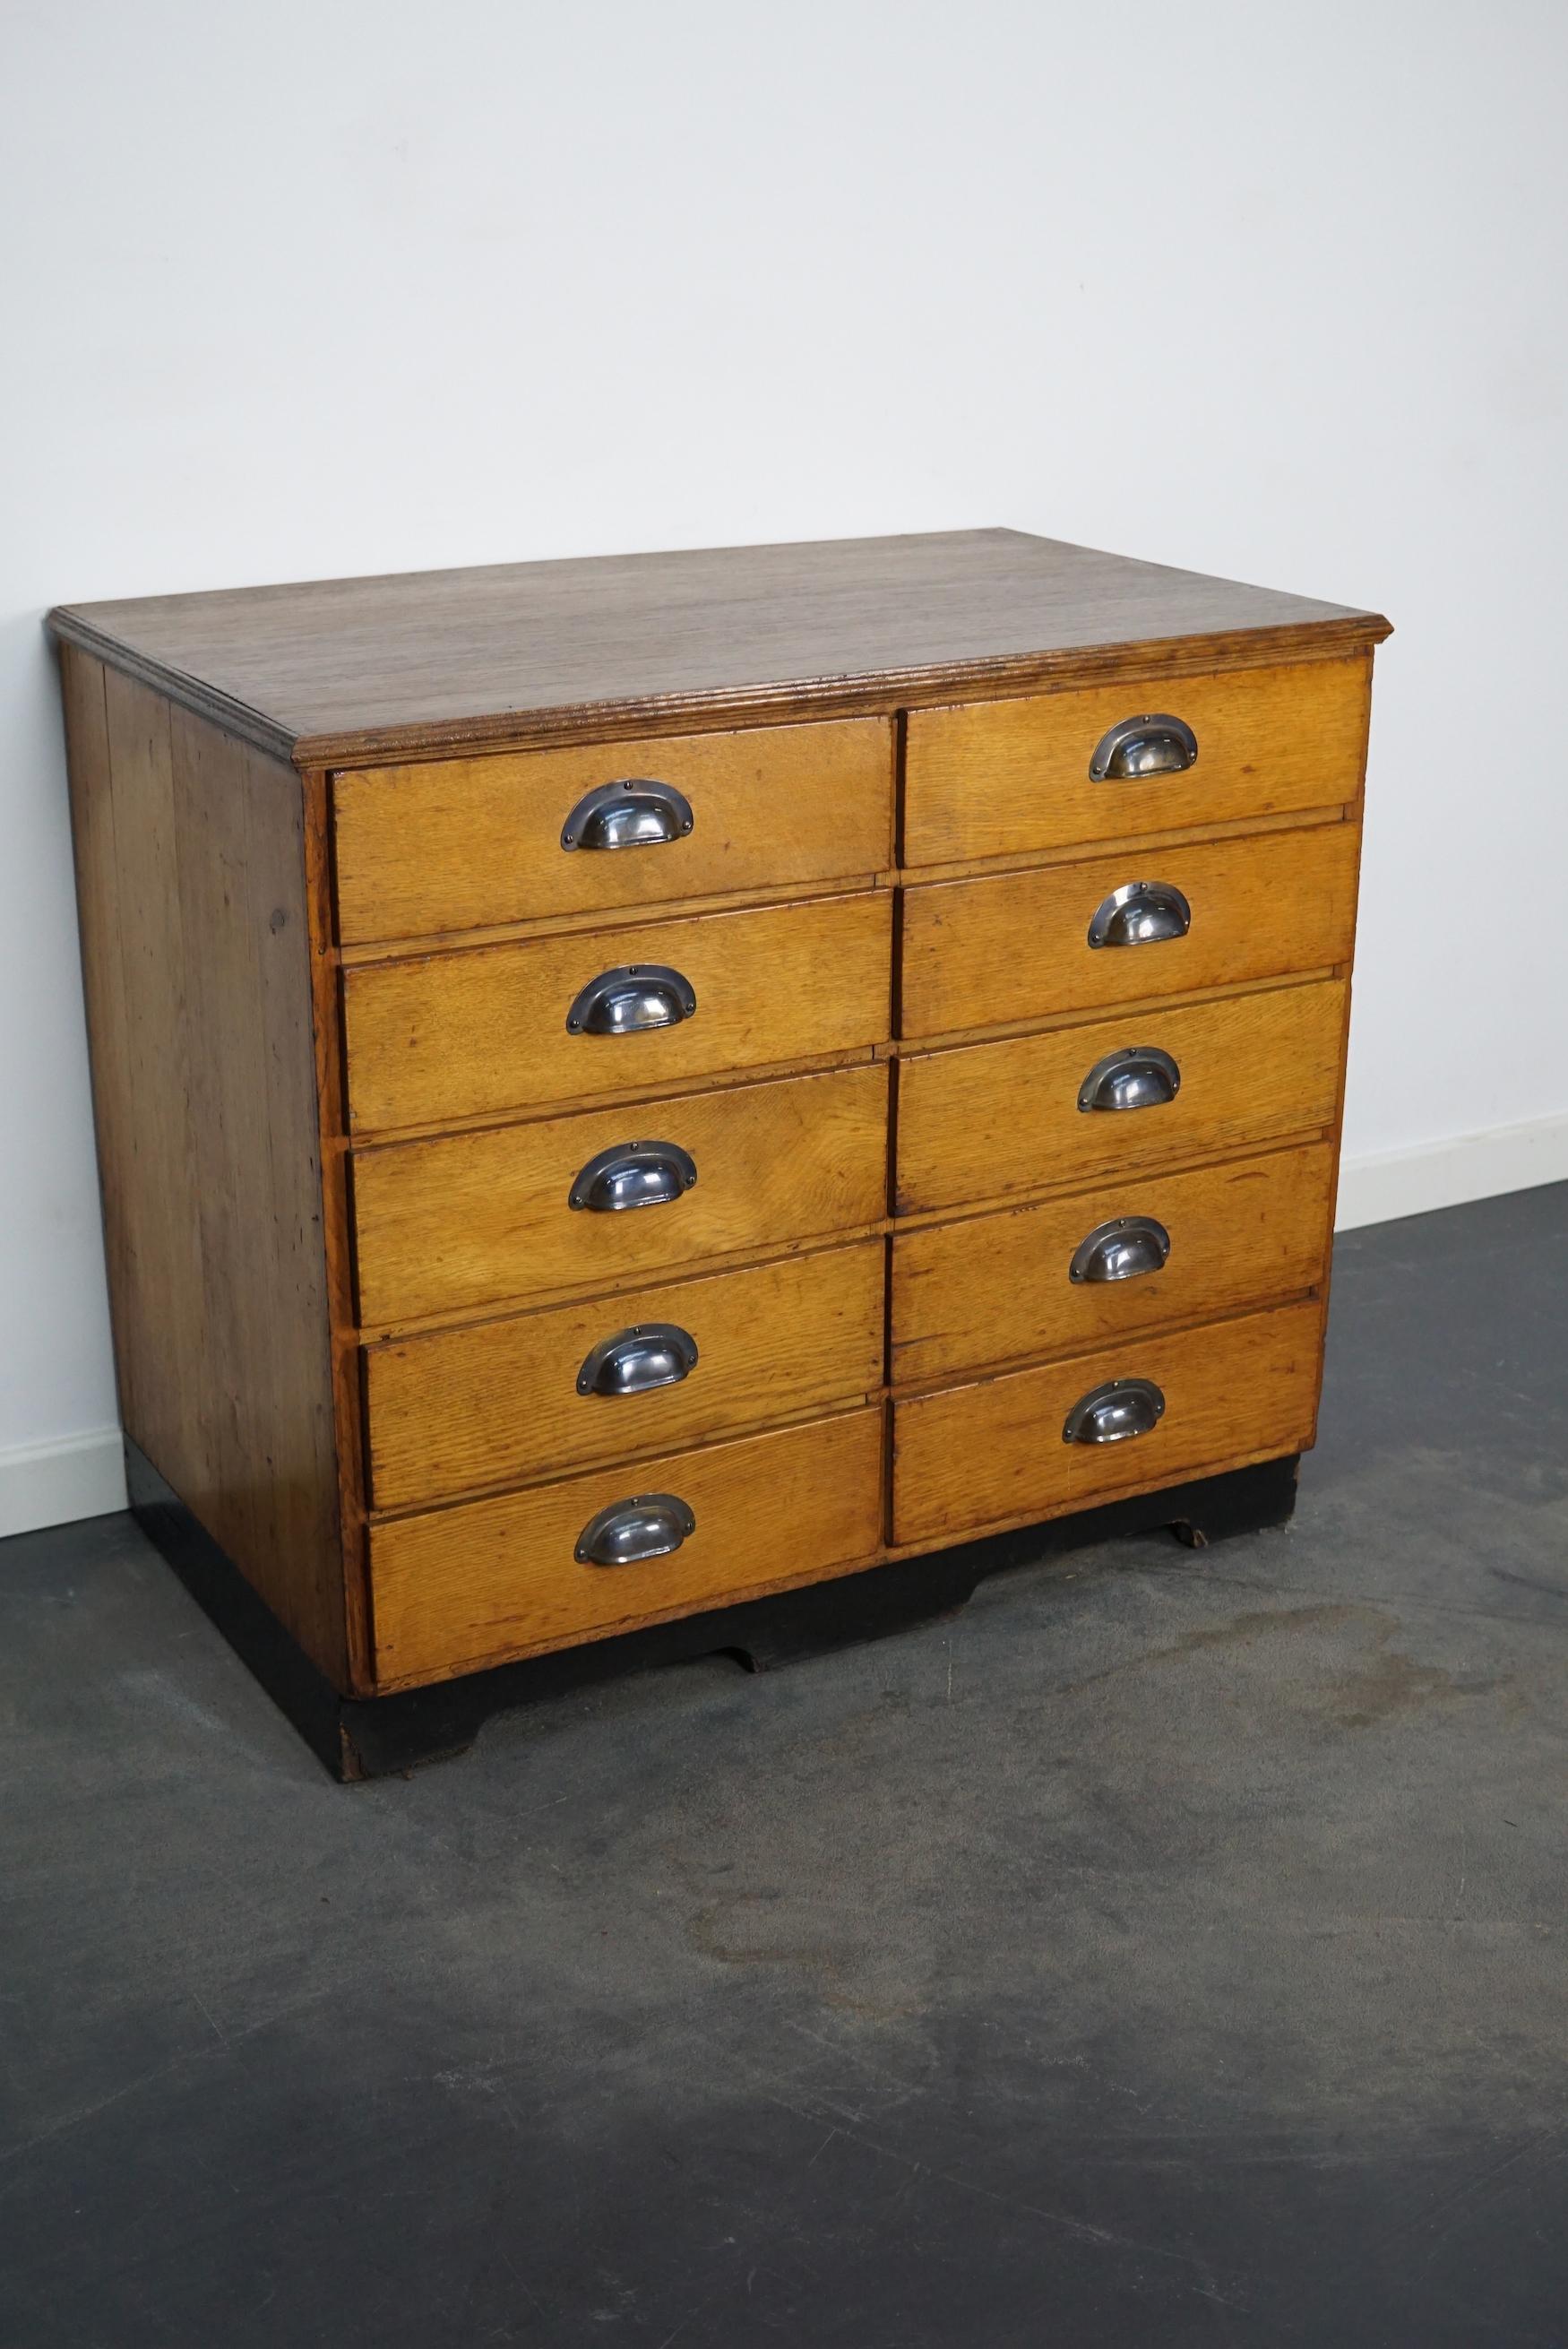 Dutch German Oak / Pine Apothecary Cabinet or Bank of Drawers, Mid-20th Century For Sale